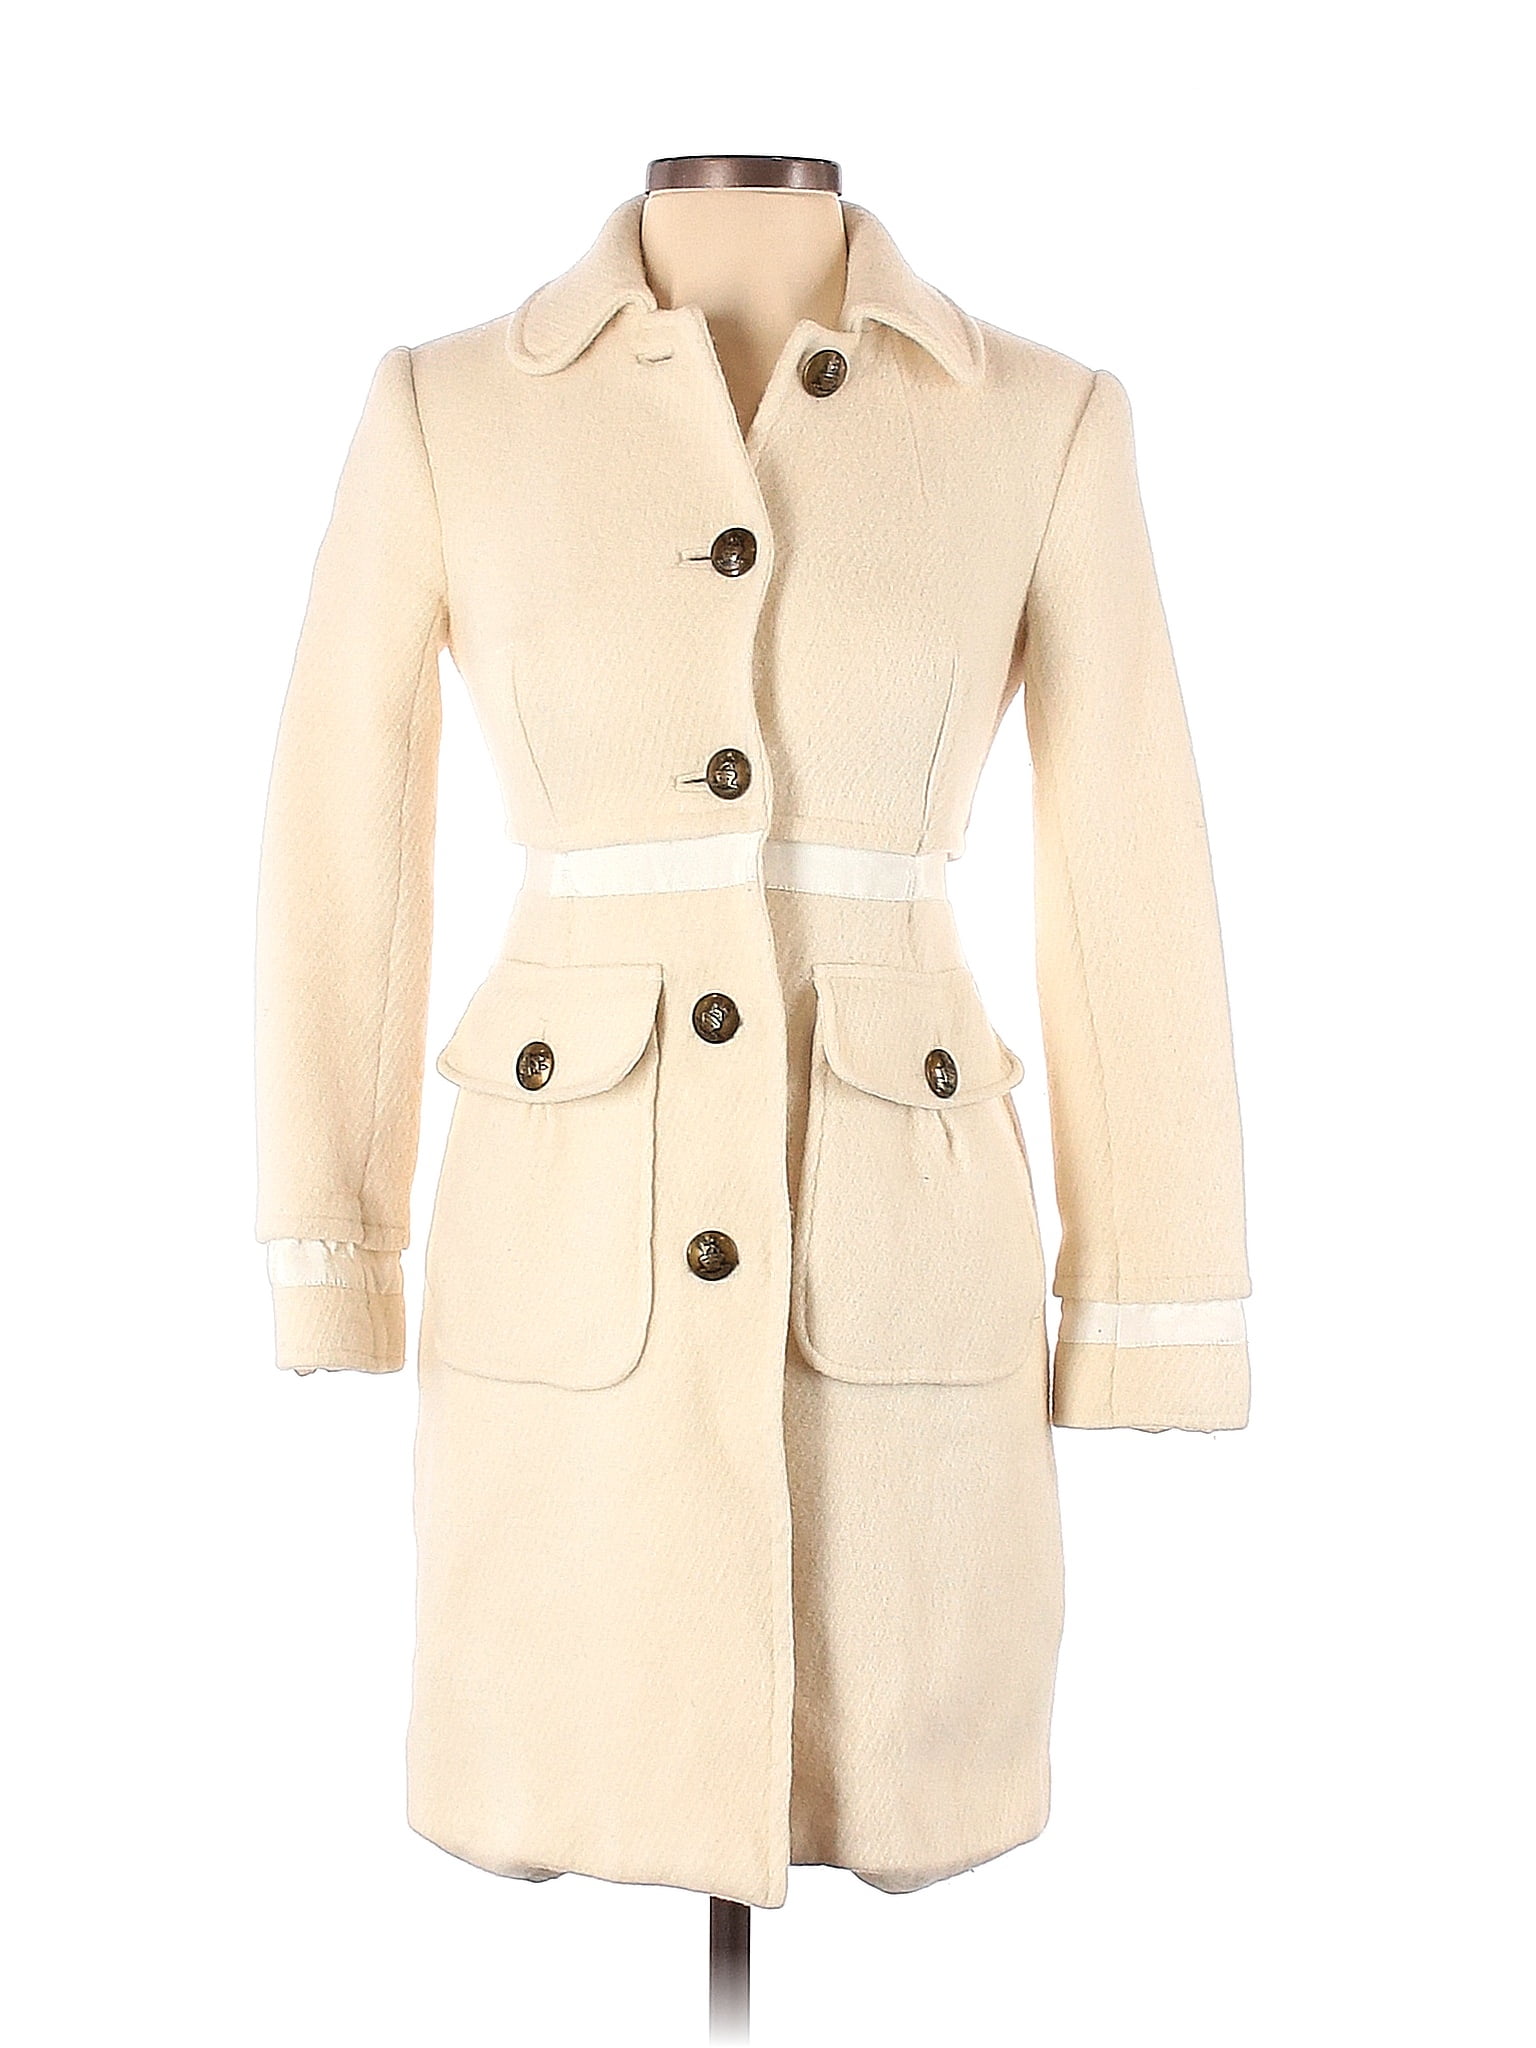 Juicy Couture Solid Tan Ivory Wool Coat Size P - 72% off | thredUP